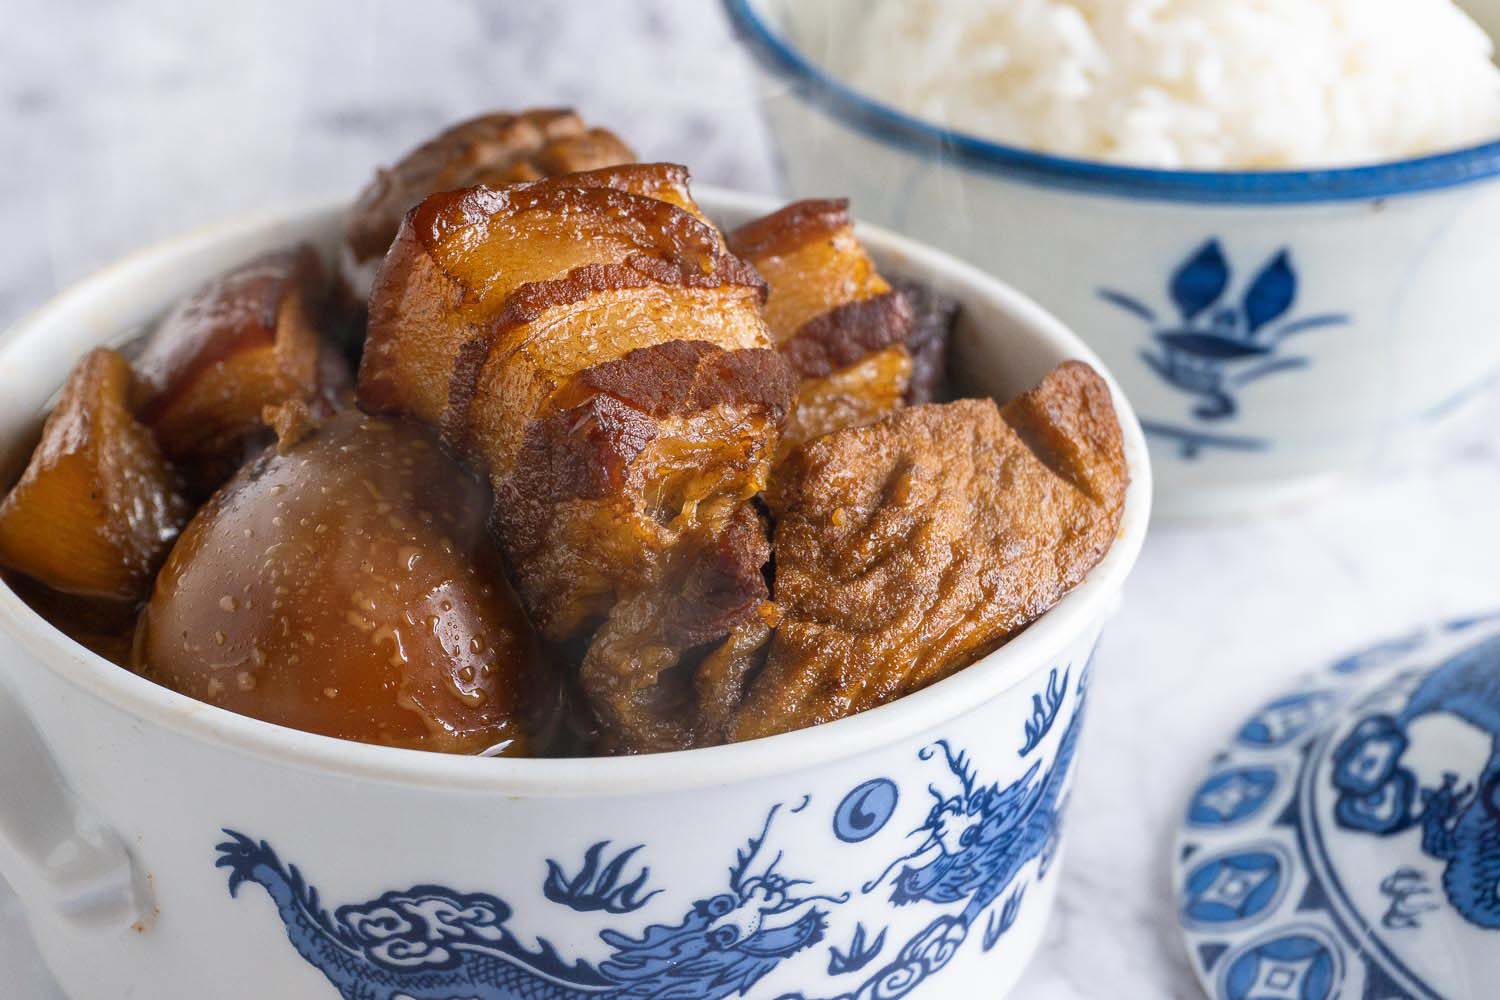 Tau You Bak (Soy Sauce Braised Pork) Thermal Cooker Recipe - Cookware, Pots  and Pans, Cooking Utensils, Kitchen Appliances